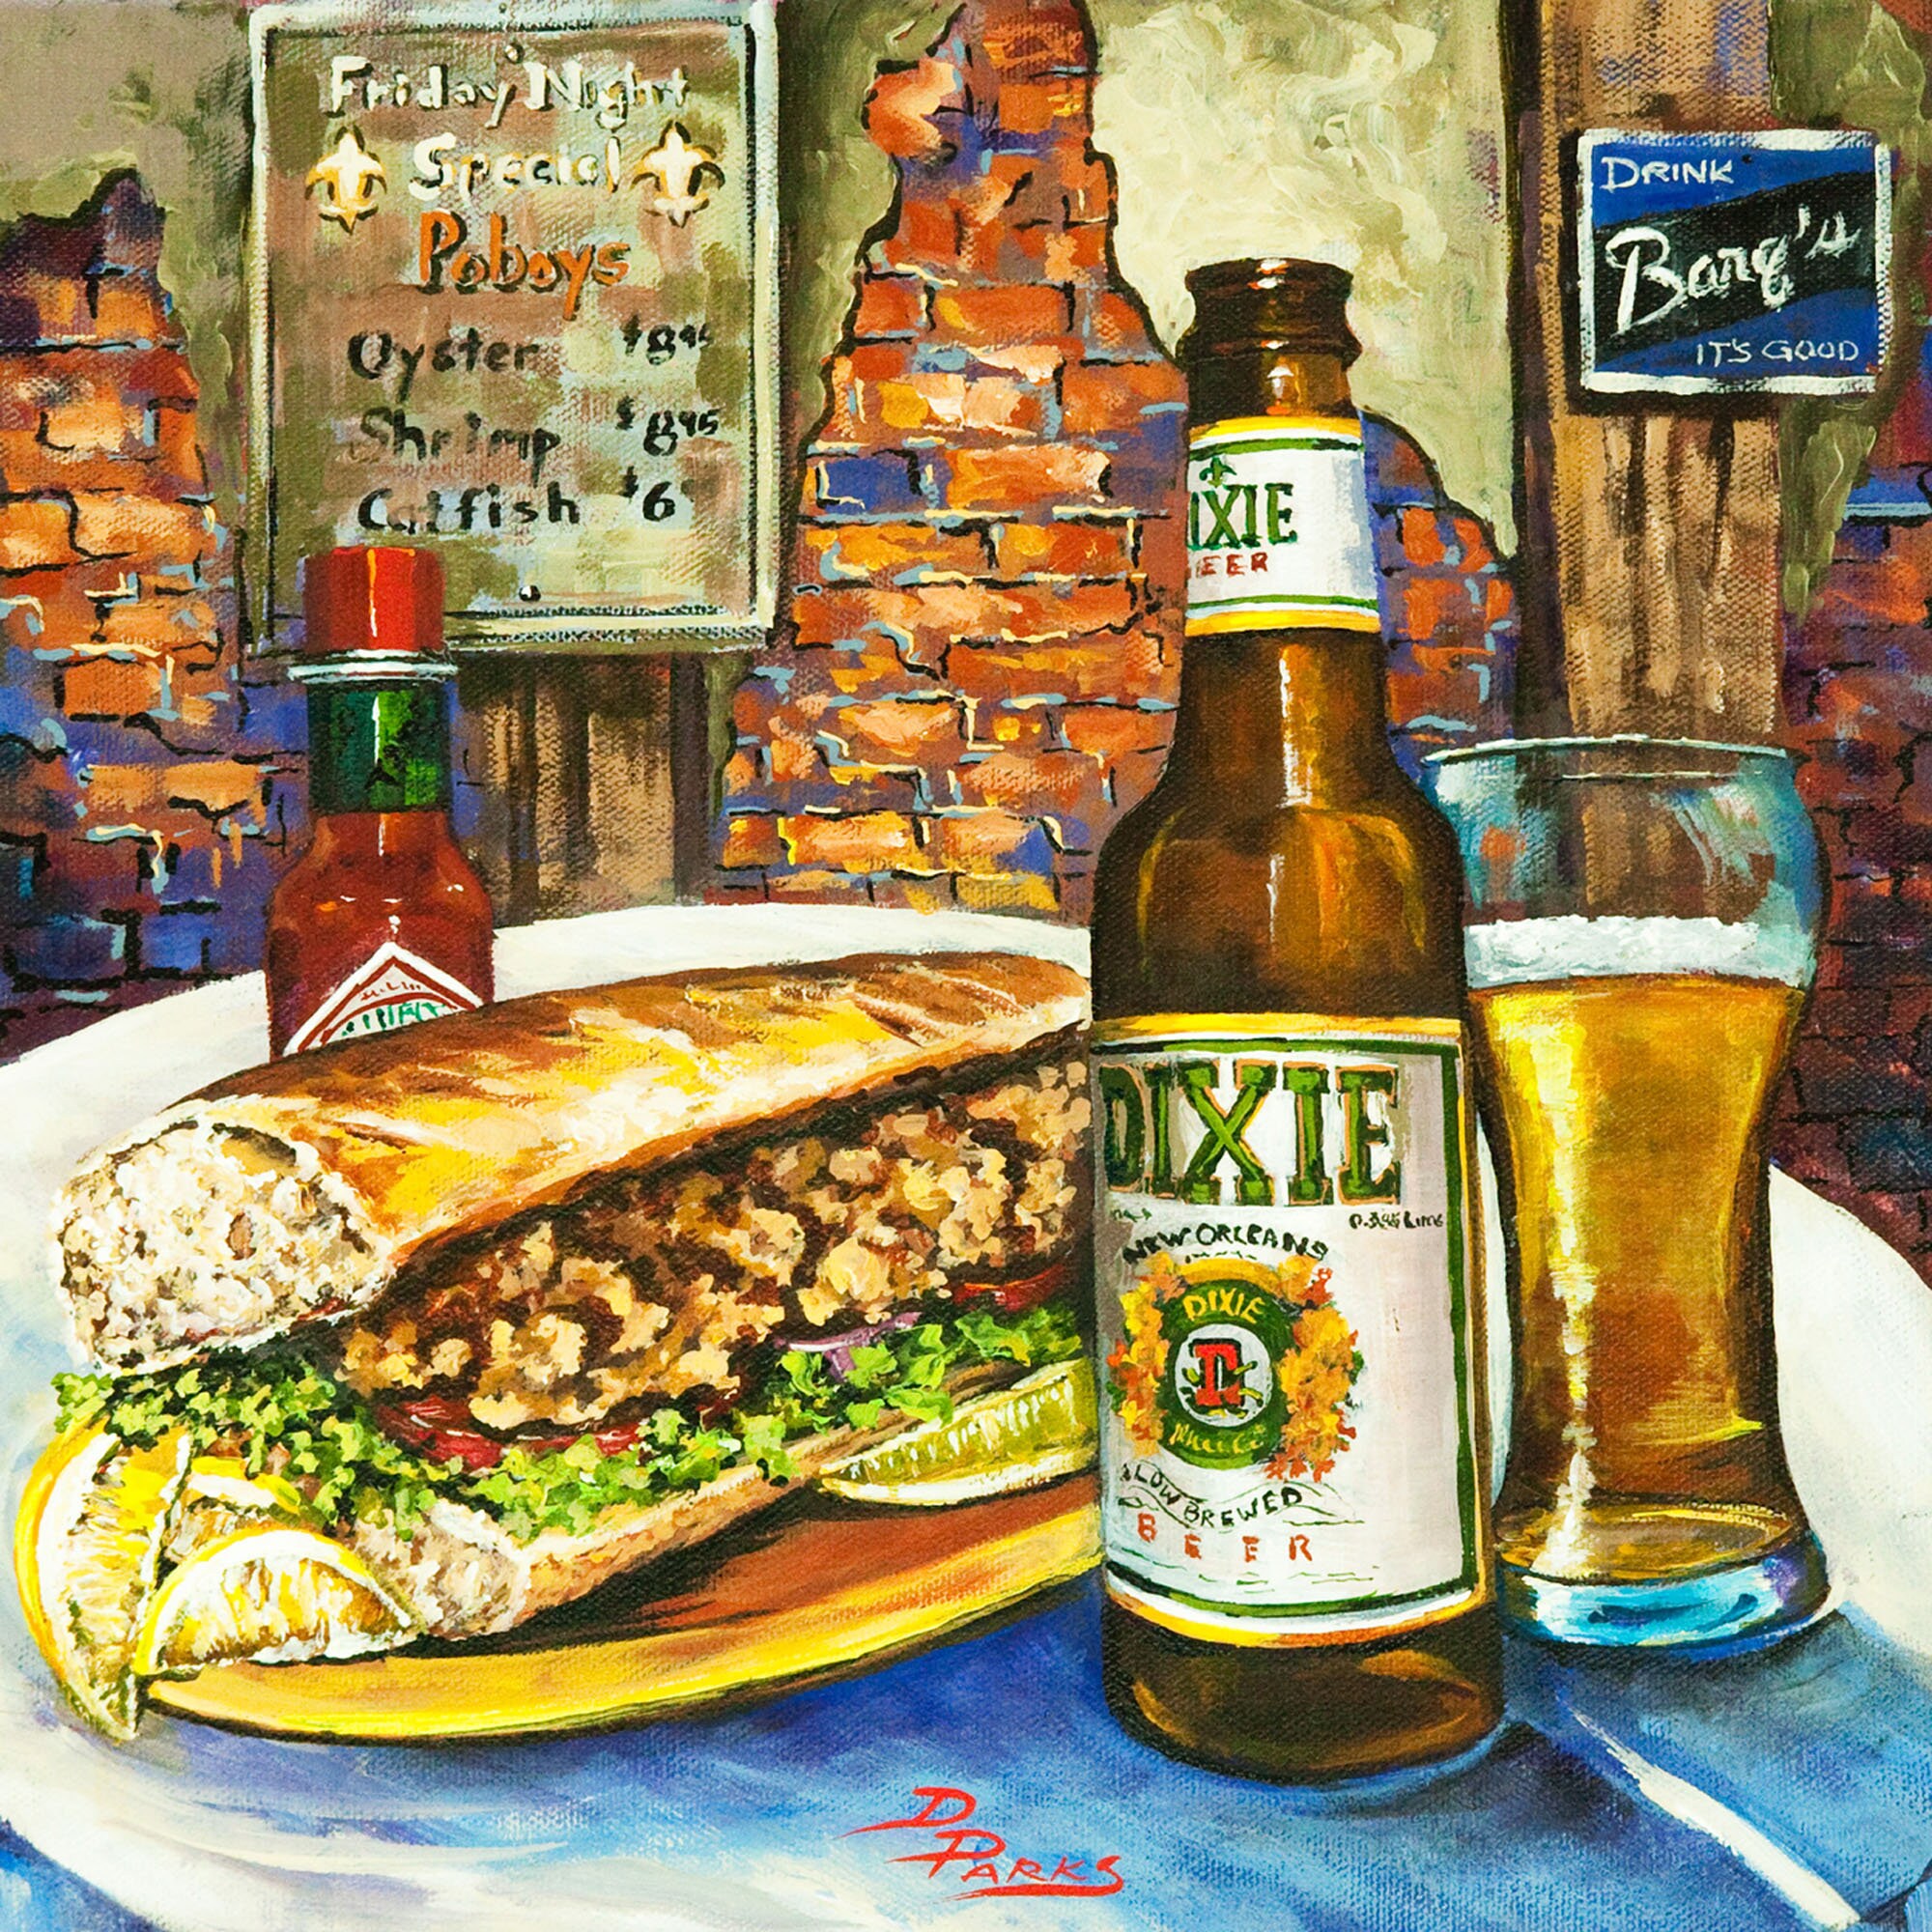 New Orleans Seafood, Fried Shrimp Po'boy, Dixie Beer, Tabasco Hot Sauce, Food, Kitchen Art - "Friday Night Special'